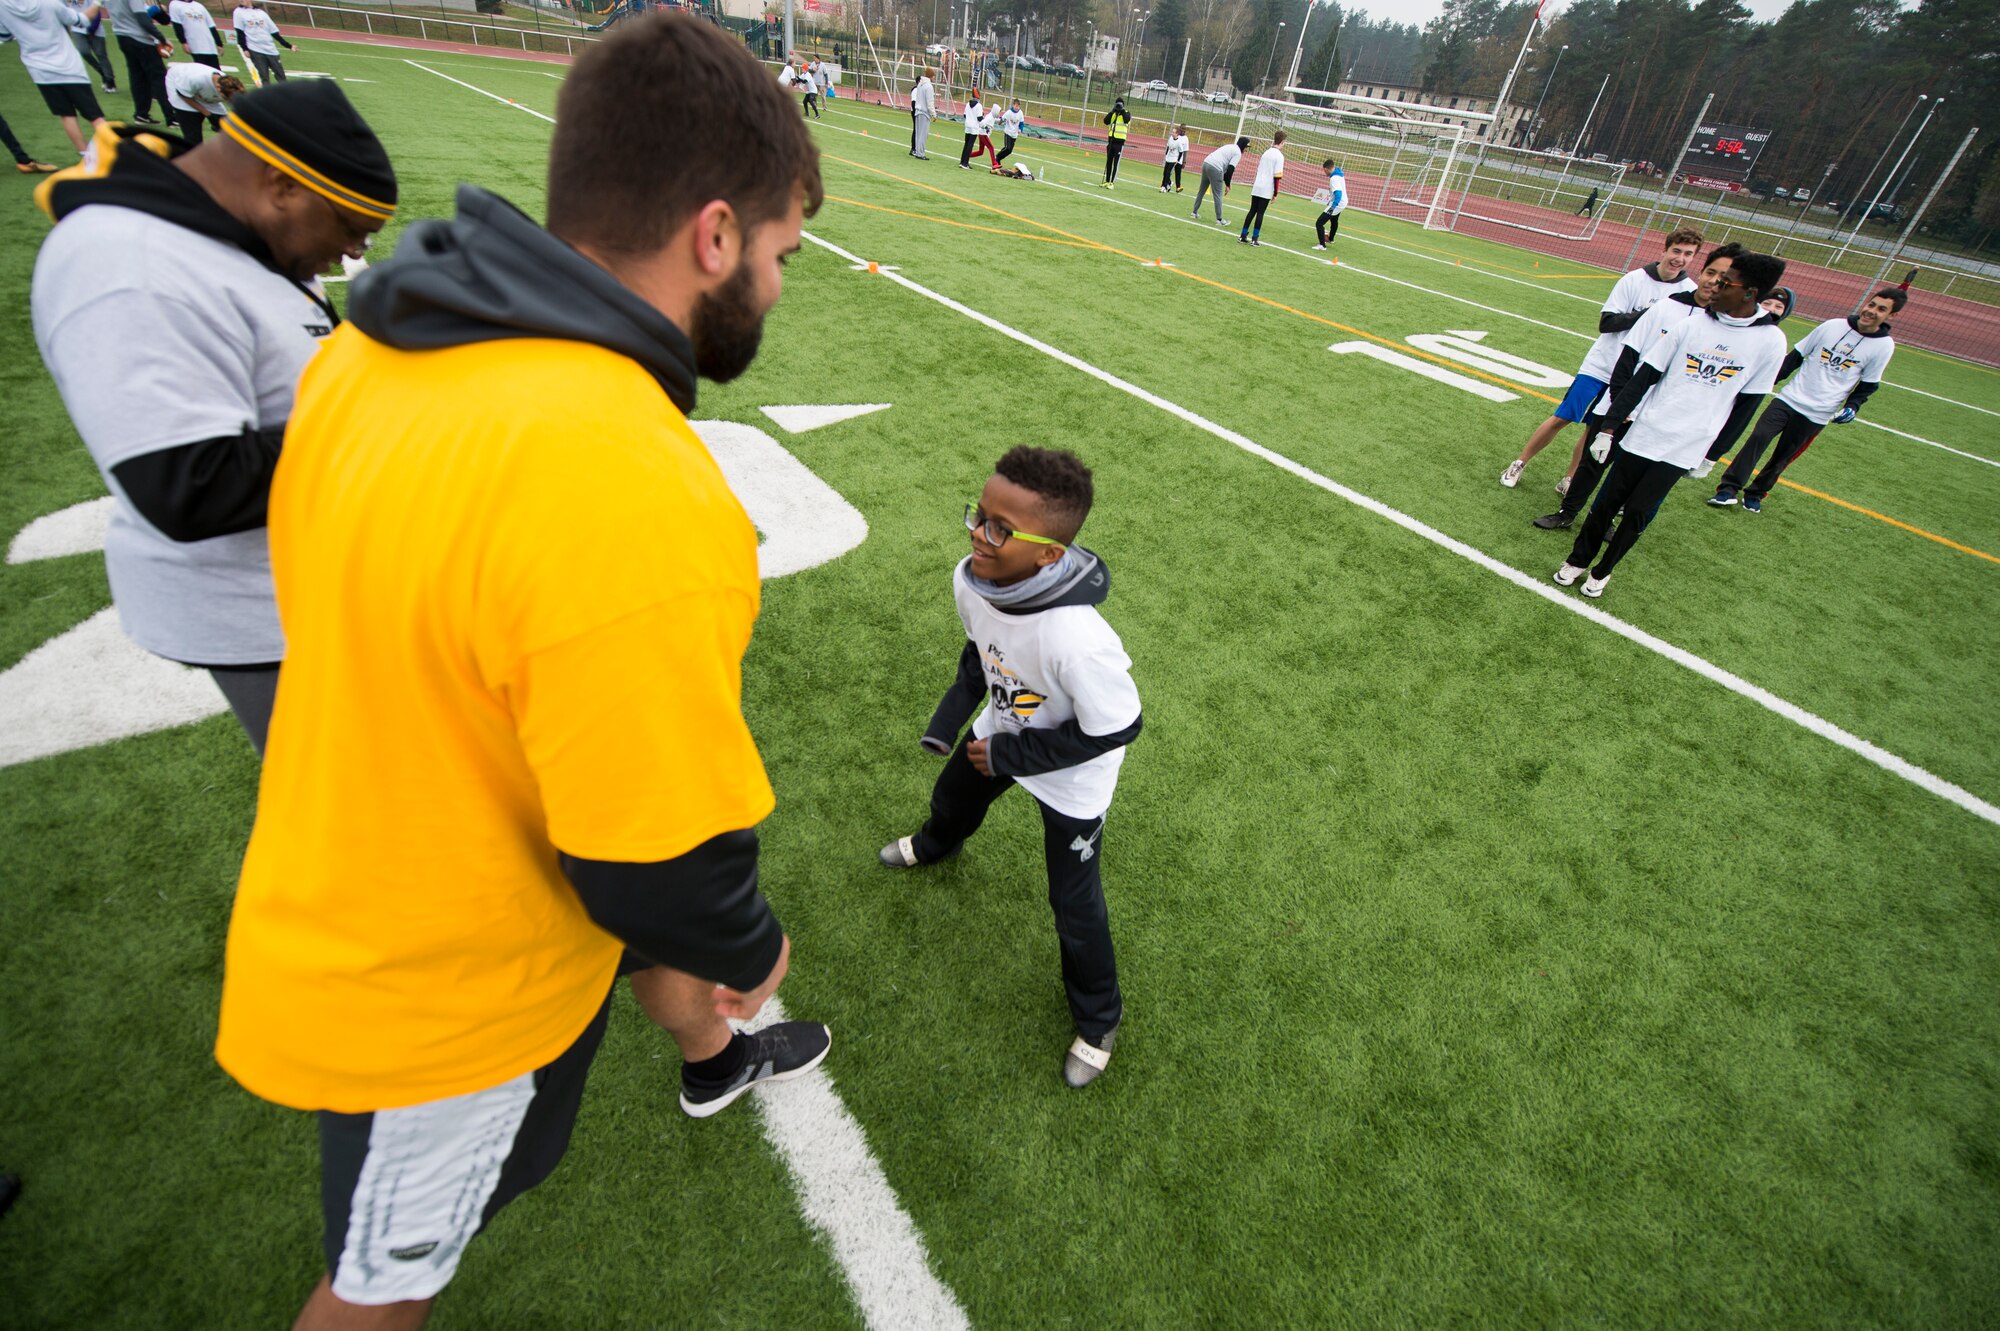 Alejandro Villanueva, Pittsburgh Steelers offensive lineman, prepares to run a route against one of his camp attendees while practicing offensive drills during his football camp at Kaiserslautern High School on Vogelweh Military Complex, Germany, April 14, 2019. Villanueva, a former U.S. Army captain, hosted his first overseas football camp here this year. (U.S. Air Force photo by Staff Sgt. Jonathan Bass)